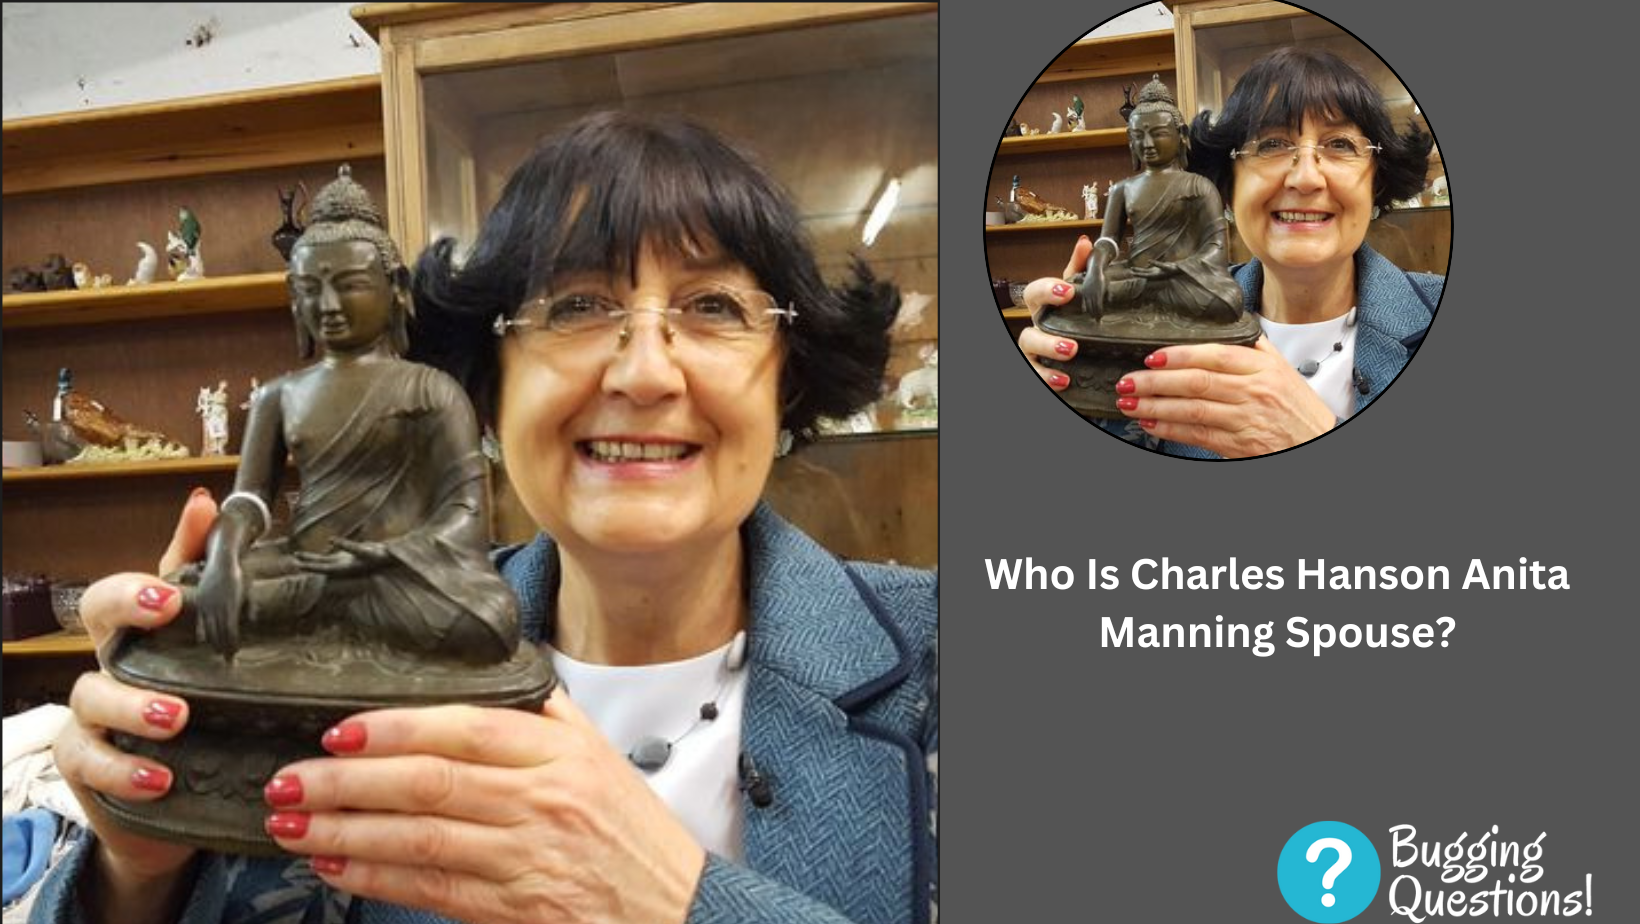 Who Is Charles Hanson Anita Manning Spouse?